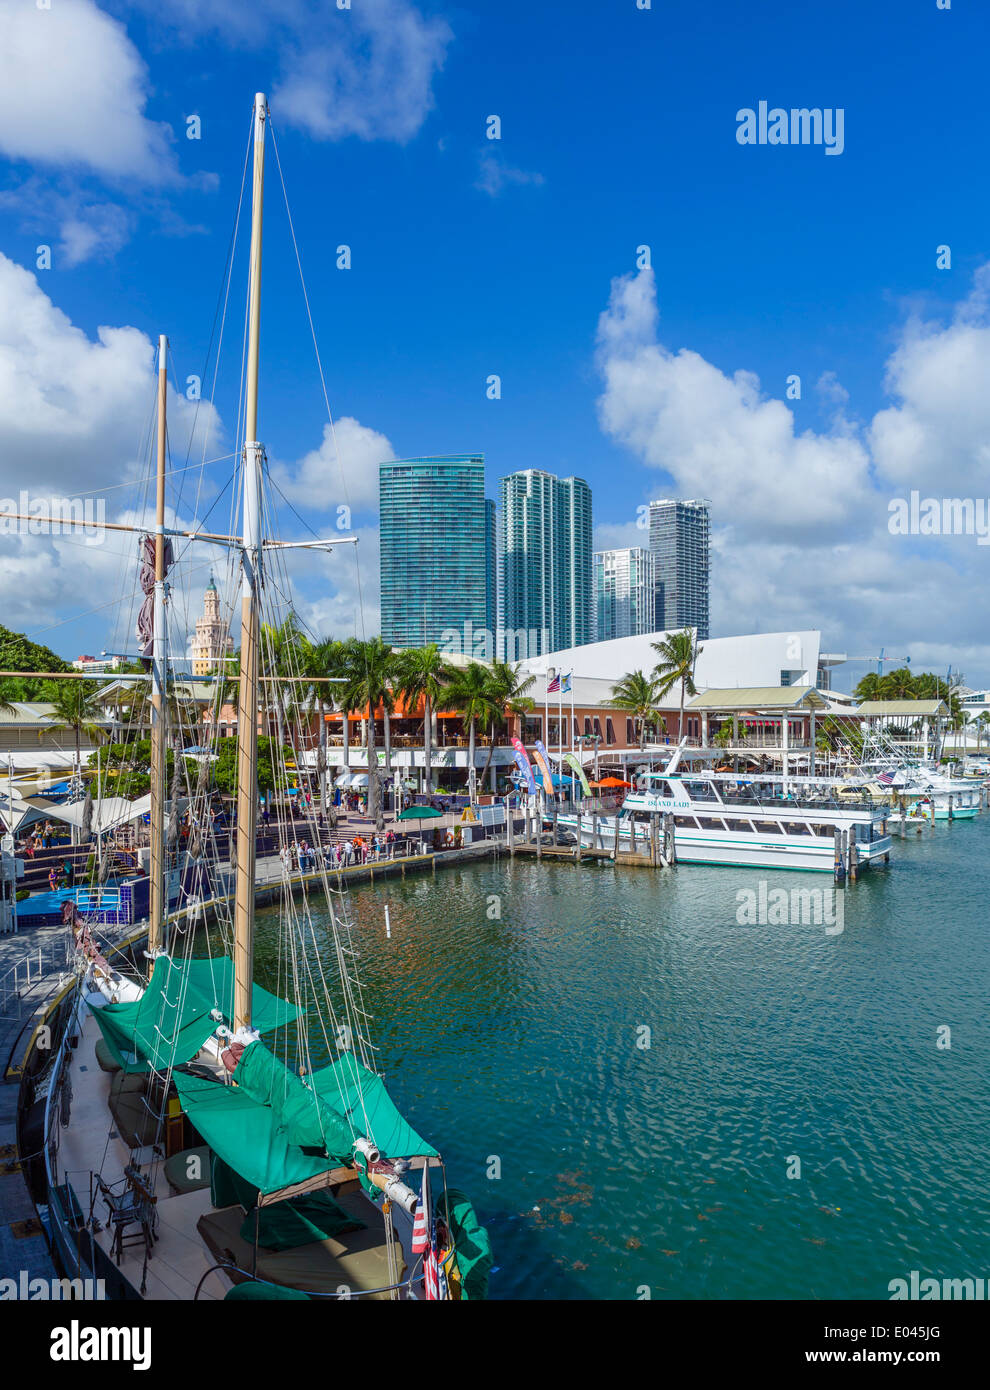 The waterfront at Bayside Marketplace in downtown Miami, Florida, USA Stock Photo